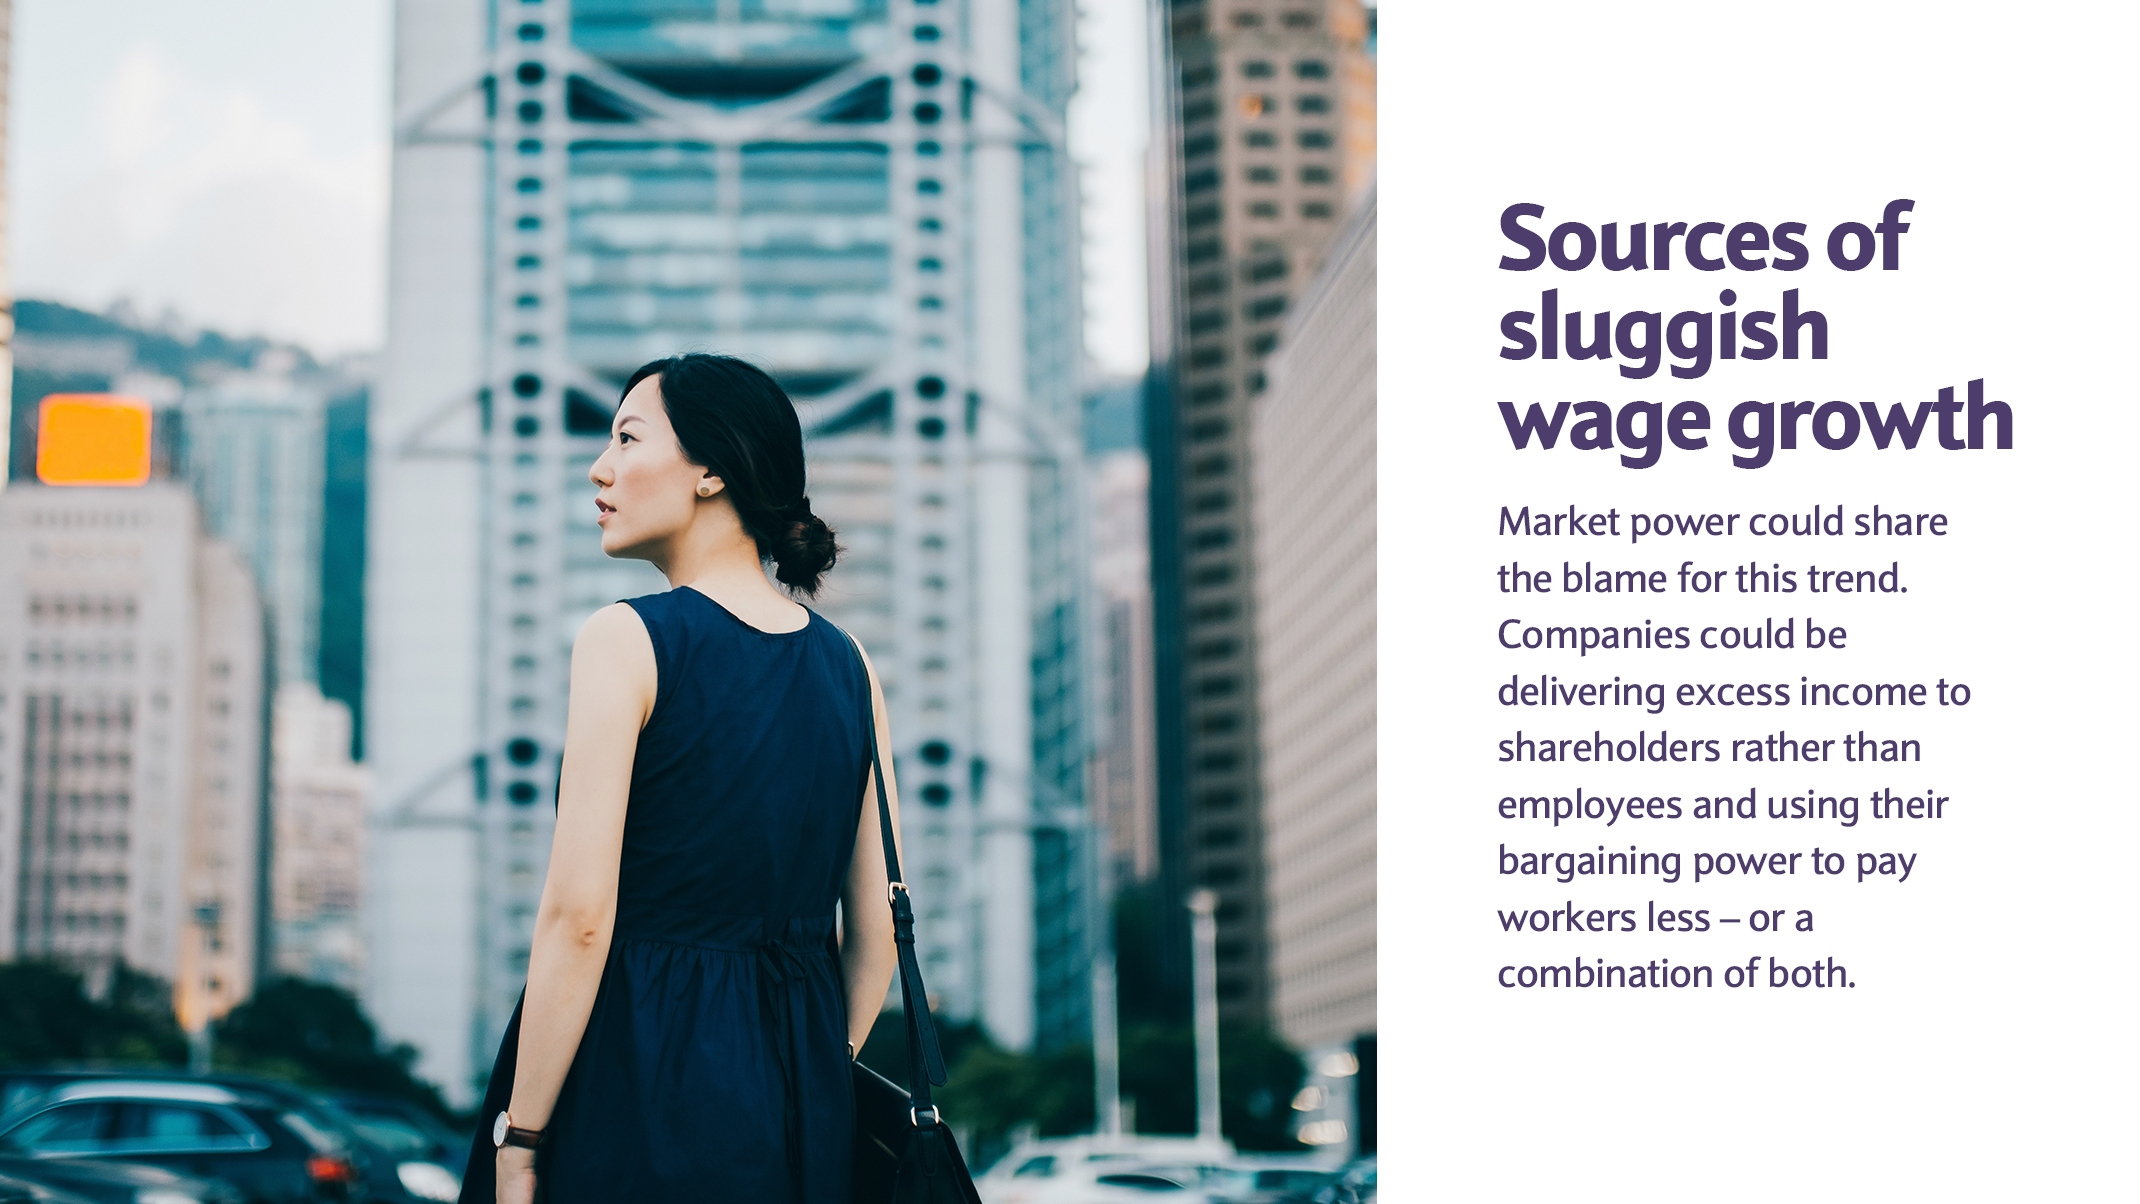 Market power could share the blame for this trend. Companies could be delivering excess income to shareholders rather than employees and using their bargaining power to pay workers less – or a combination of both. 